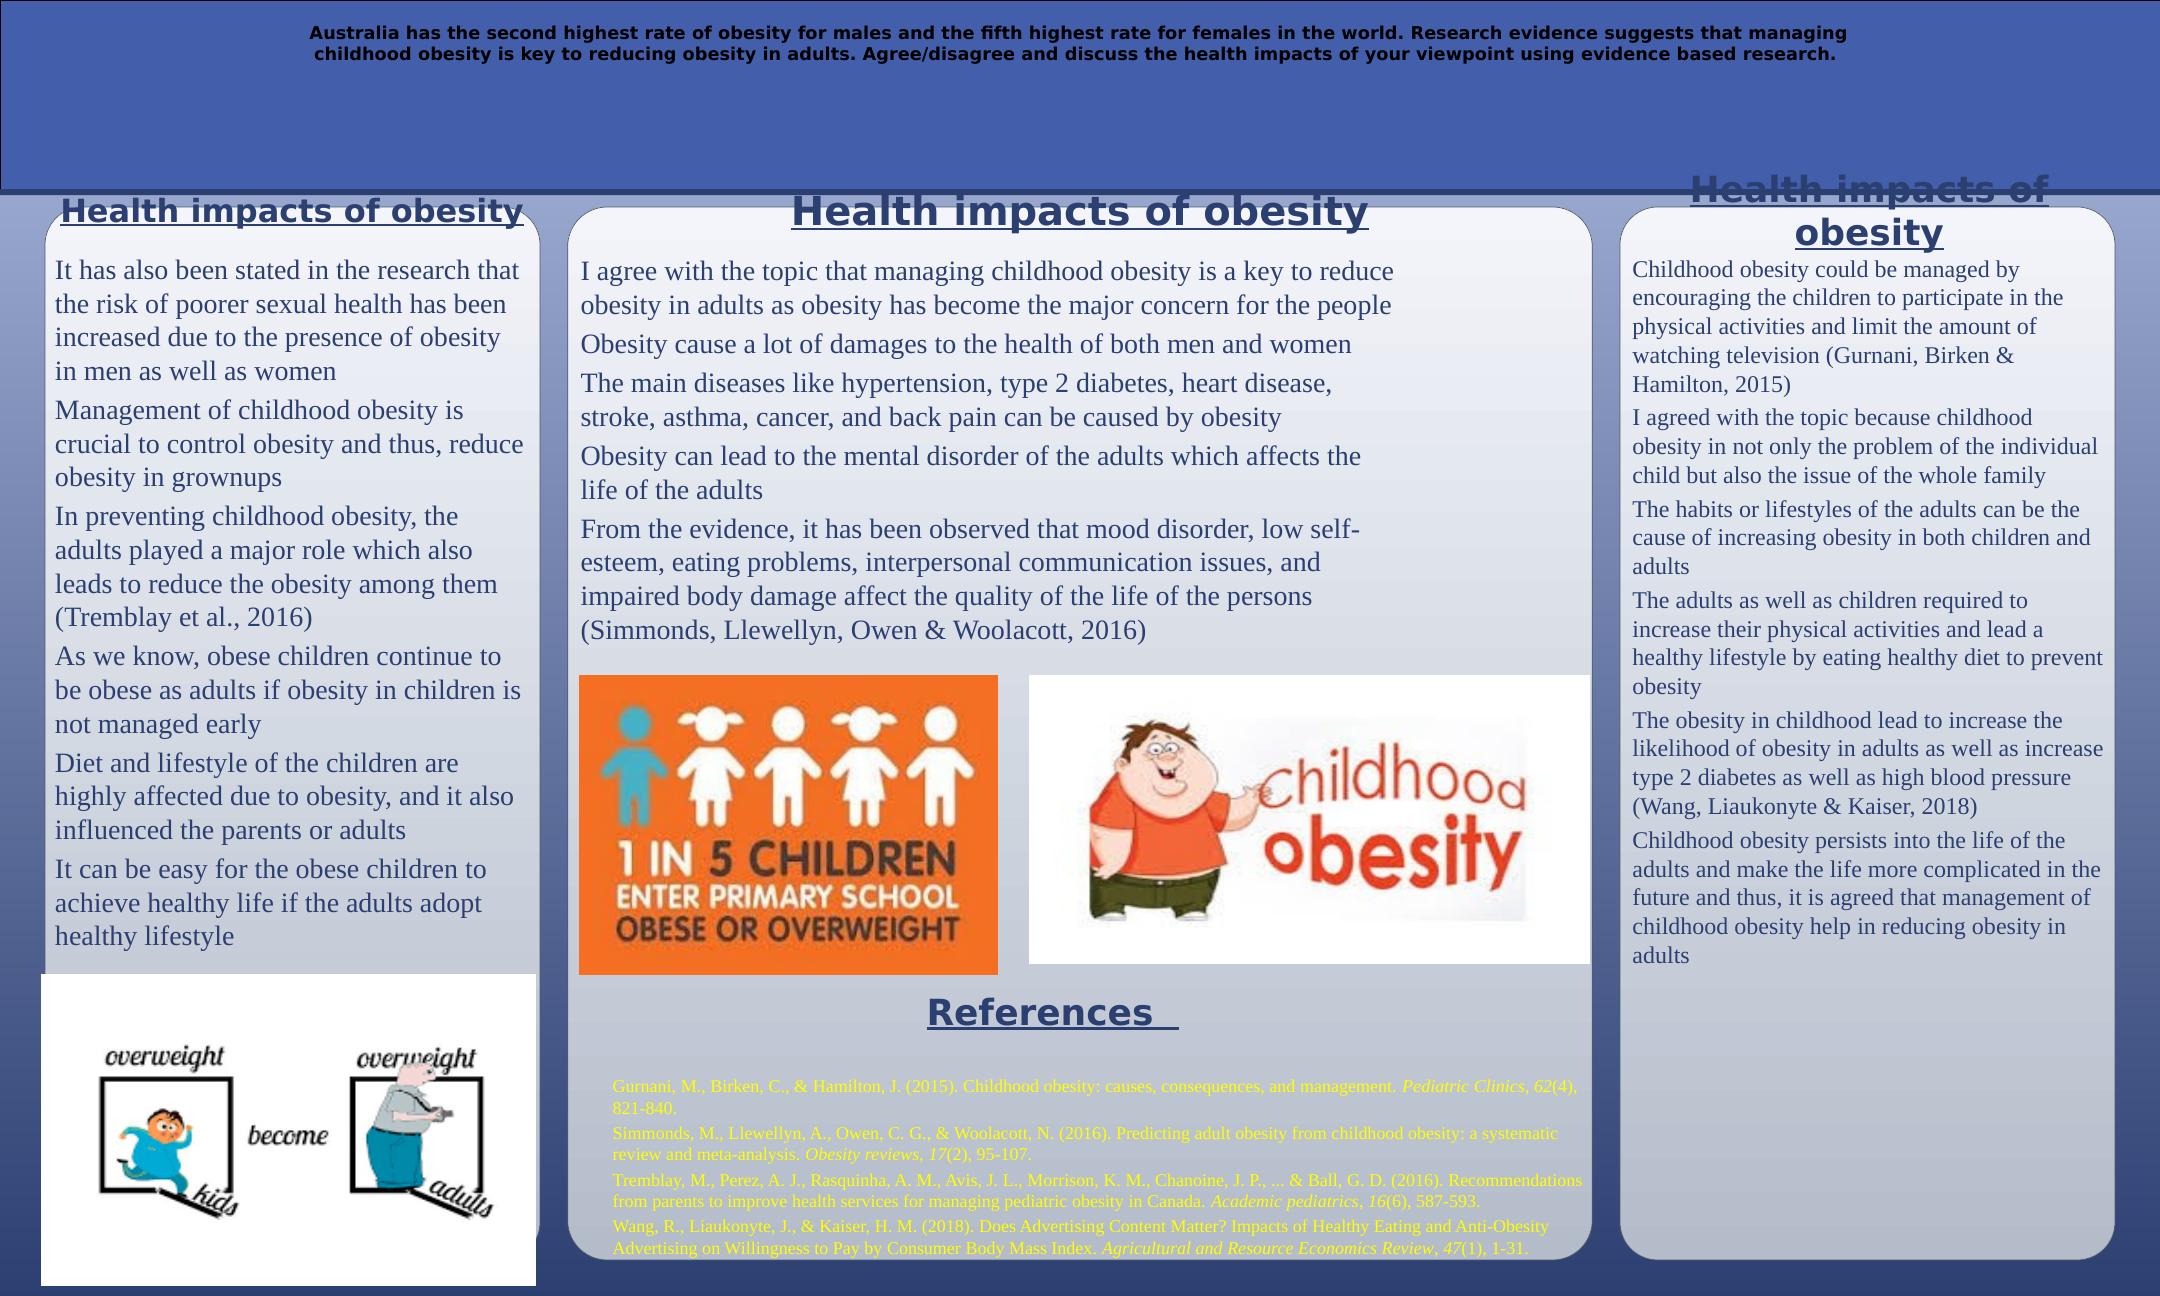 Managing Childhood Obesity to Reduce Obesity in Adults_1